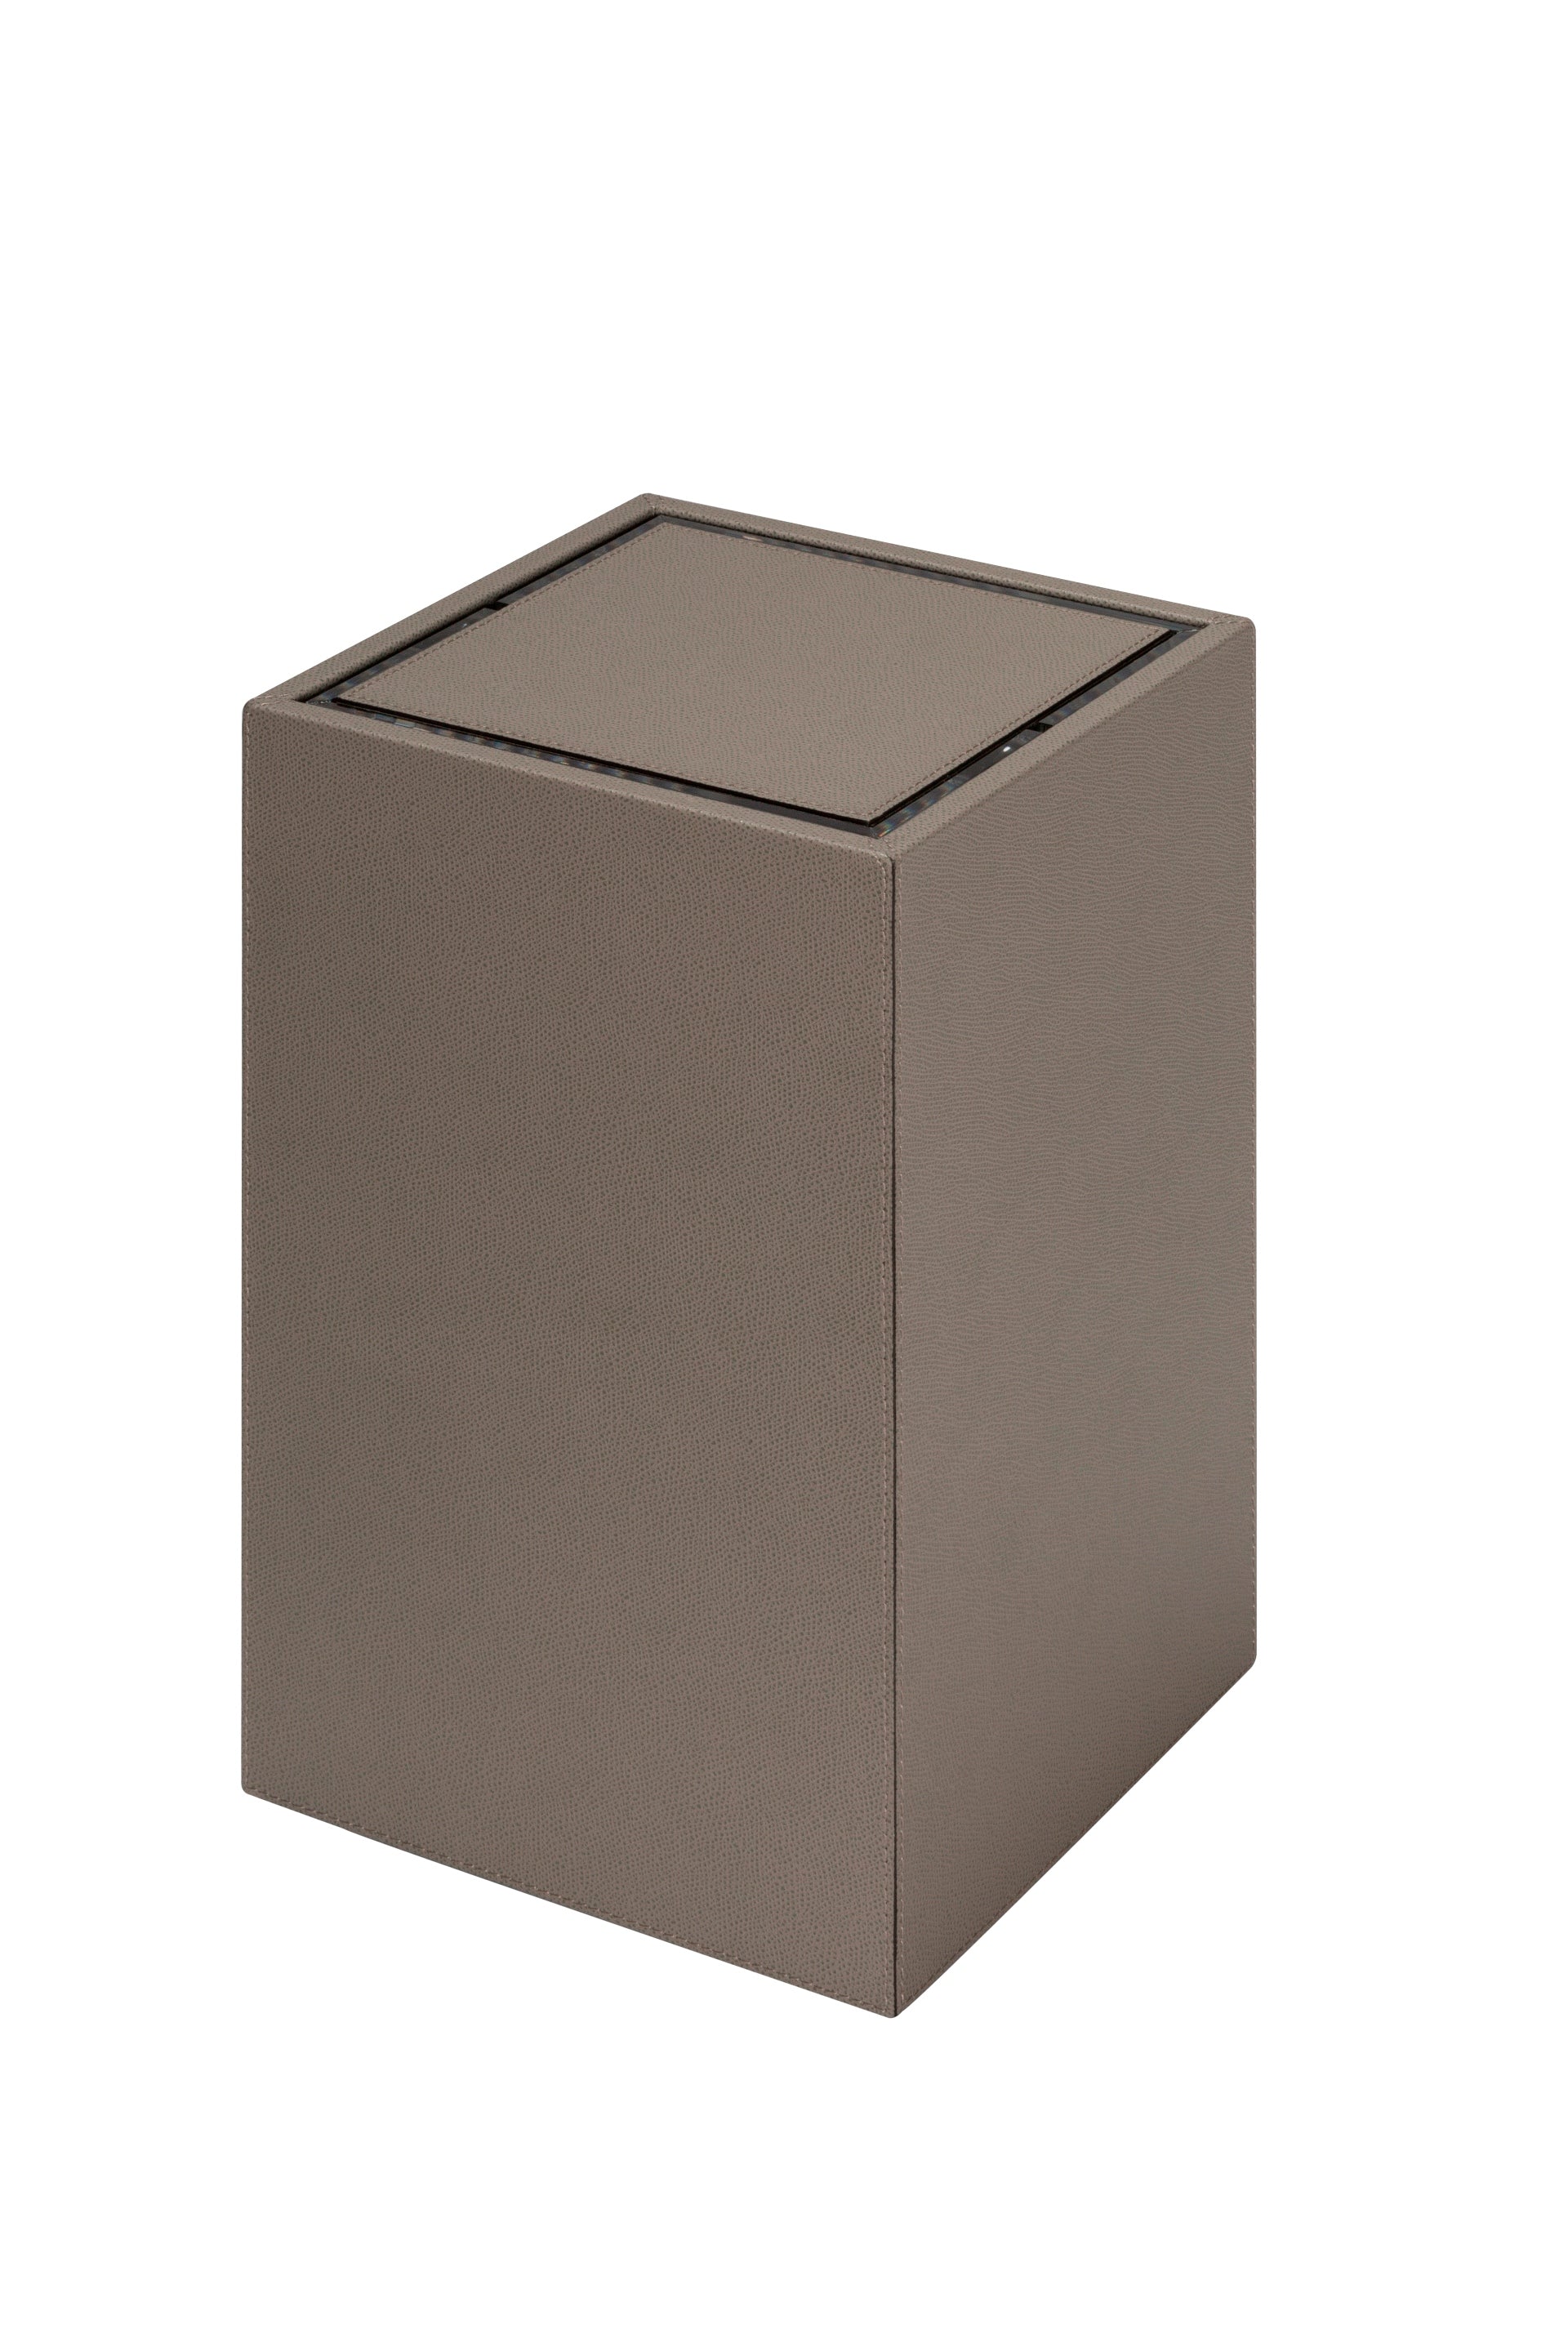 Giobagnara Groove Wastepaper Bin | Leather-covered wood structure | Non-slip waterproof rubber base underneath | Removable tilting lid and plexiglass inner structure for easy cleaning | Discover Luxury Lifestyle Accessories at 2Jour Concierge, #1 luxury high-end gift & lifestyle shop